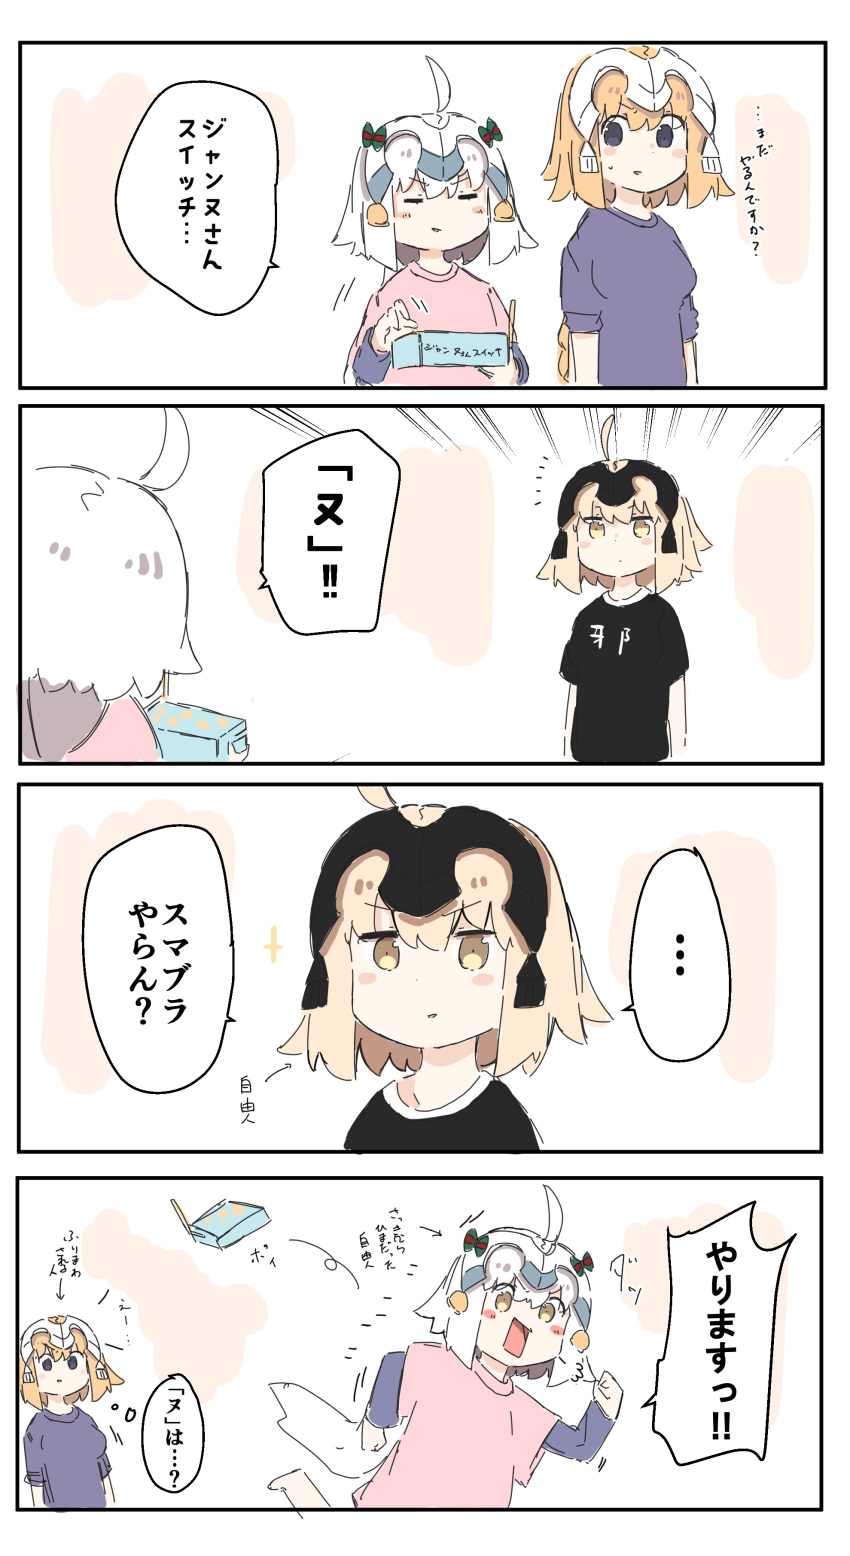 ... 3girls 4koma absurdres ahoge bangs barefoot bell black_shirt blonde_hair bow brown_eyes comic directional_arrow eyebrows_visible_through_hair eyes_closed fate/grand_order fate_(series) green_bow hair_between_eyes headpiece highres jeanne_d'arc_(alter)_(fate) jeanne_d'arc_(fate) jeanne_d'arc_(fate)_(all) jeanne_d'arc_alter_santa_lily light_brown_hair long_hair long_sleeves multiple_girls pink_shirt purple_eyes purple_shirt ranf running shirt short_over_long_sleeves short_sleeves spoken_ellipsis striped striped_bow translation_request very_long_hair white_hair